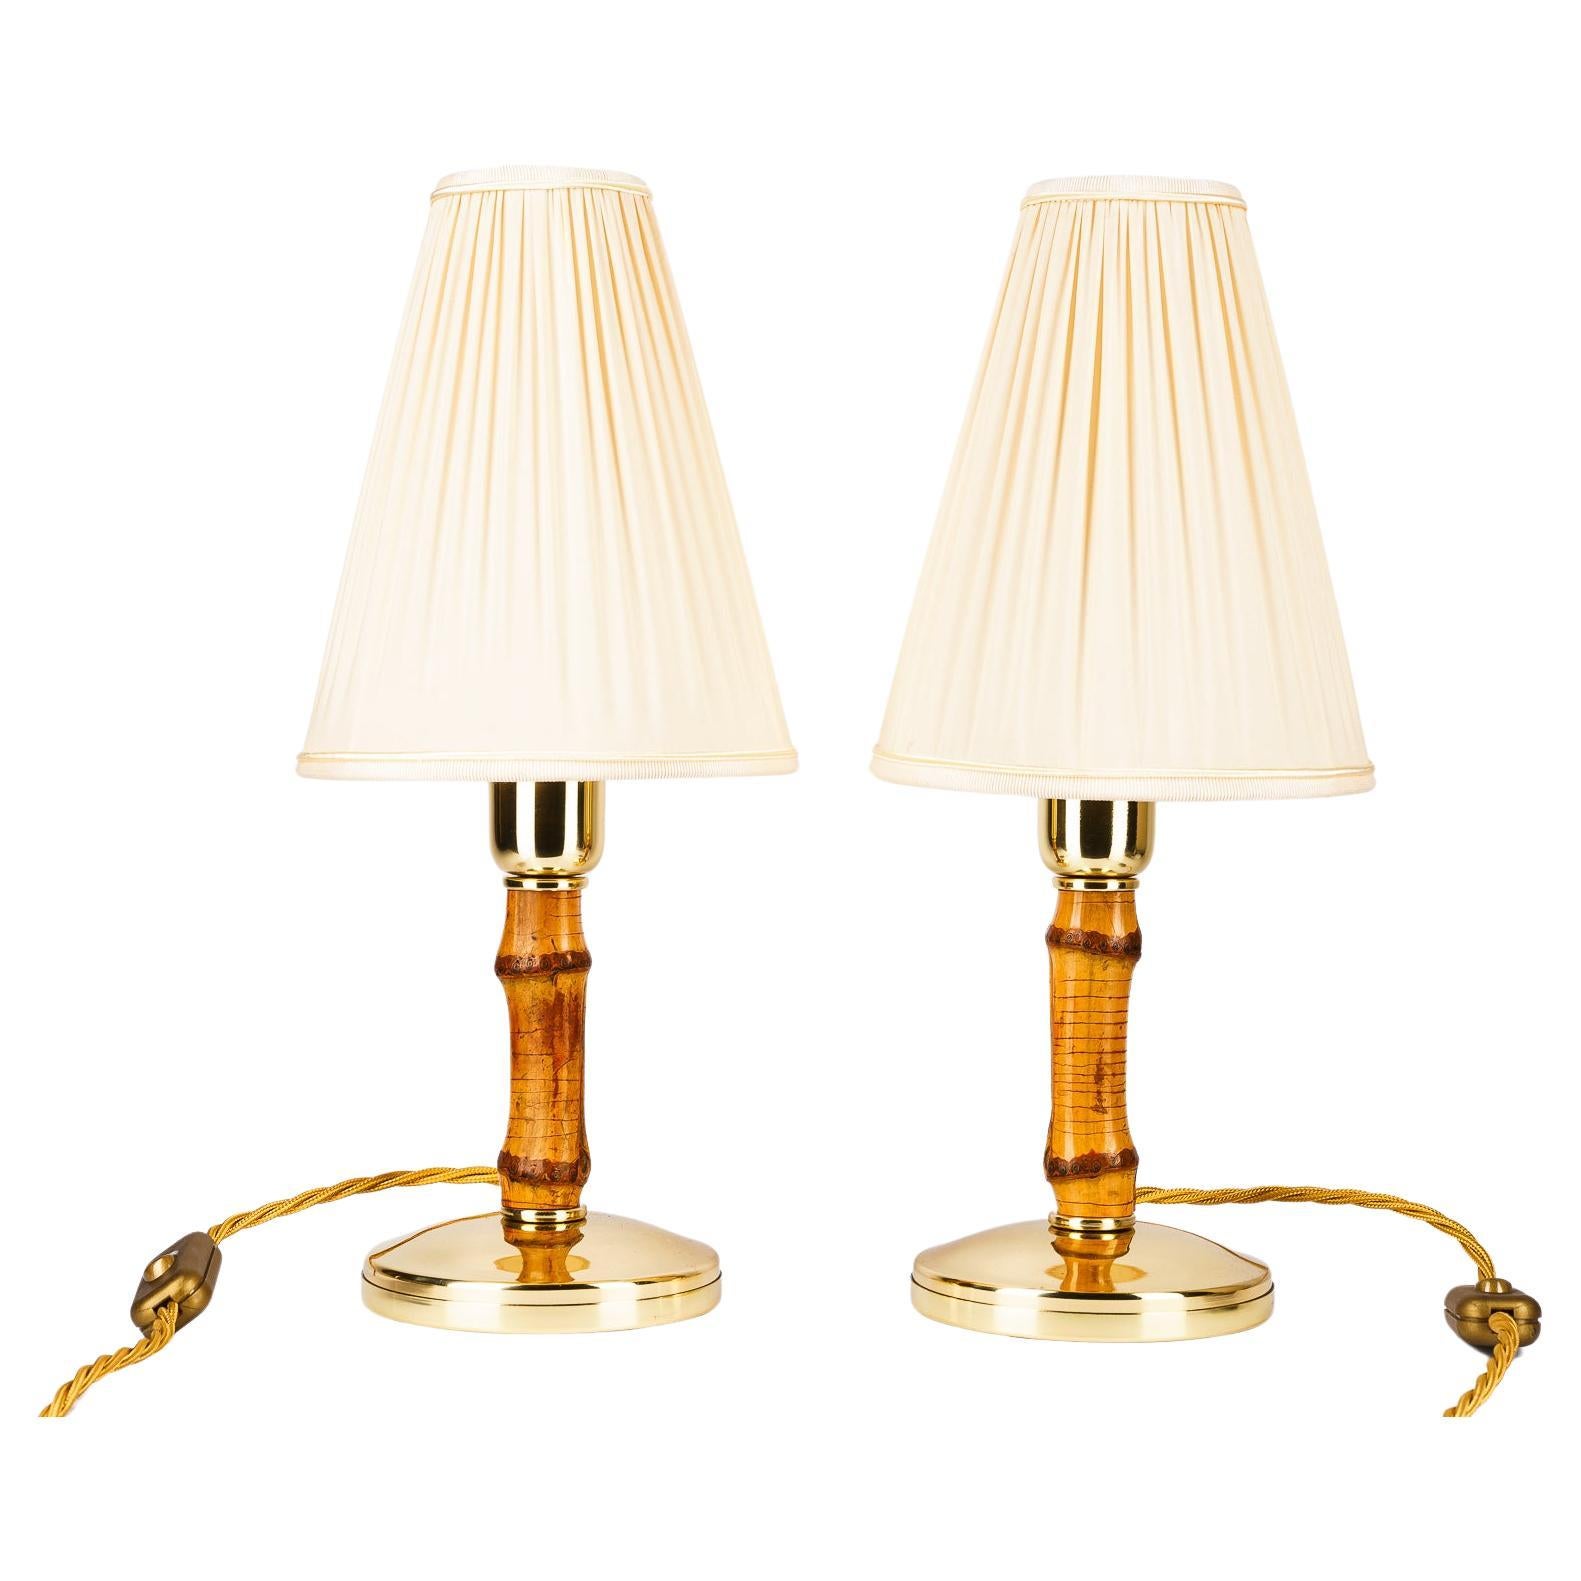 2 Rupert Nikoll Bamboo Table Lamps with Fabric Shades Austria Around 1950s For Sale